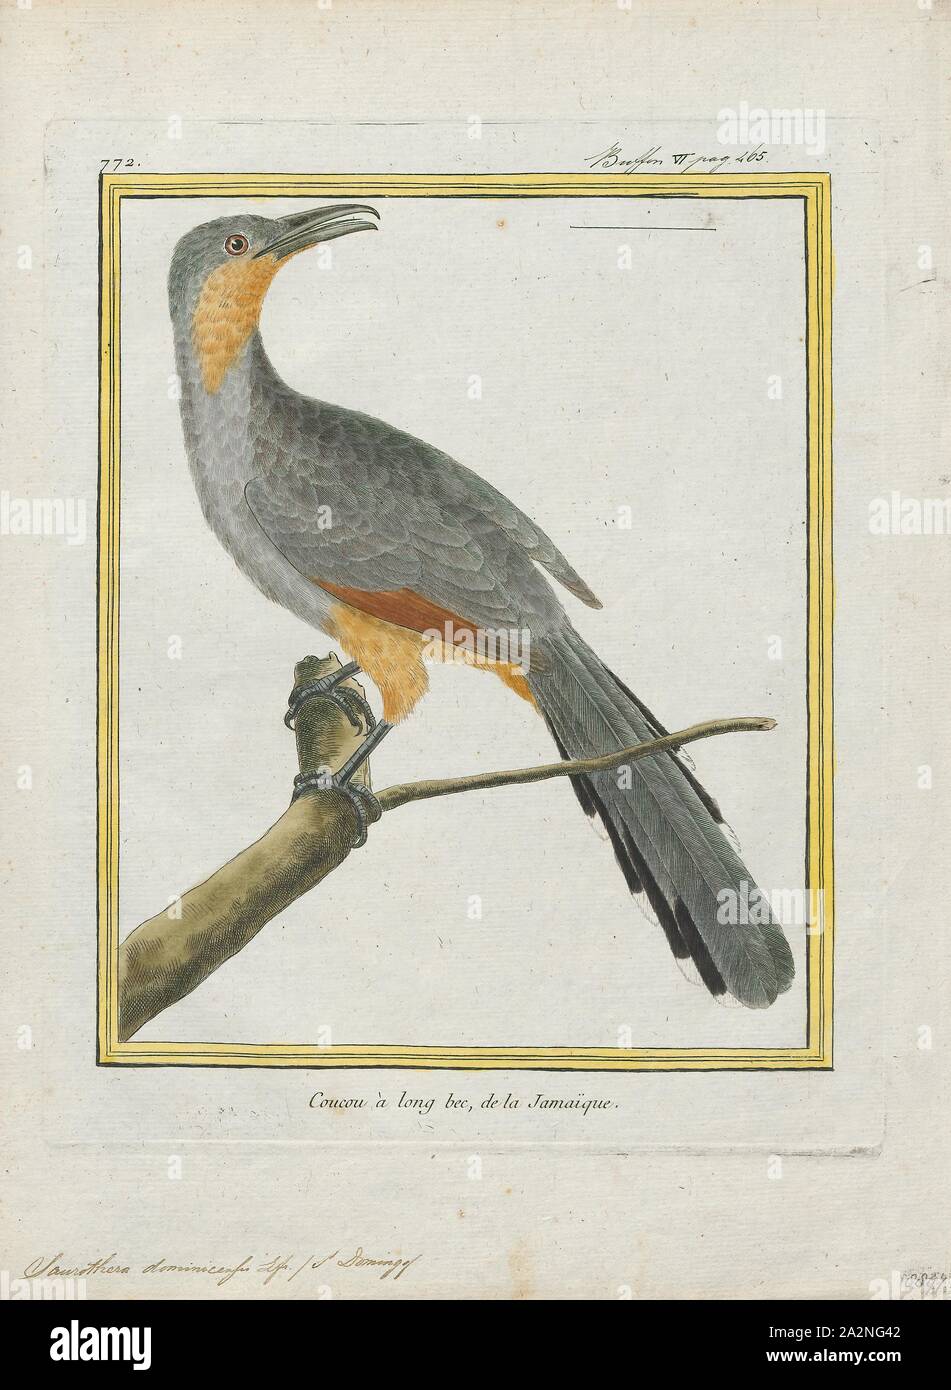 Saurothera dominicensis, Print, Coccyzus, Coccyzus is a genus of cuckoos which occur in the Americas. The genus name is from Ancient Greek kokkuzo, which means to call like a common cuckoo. These include the lizard cuckoos formerly included in the genus Saurothera., 1700-1880 Stock Photo